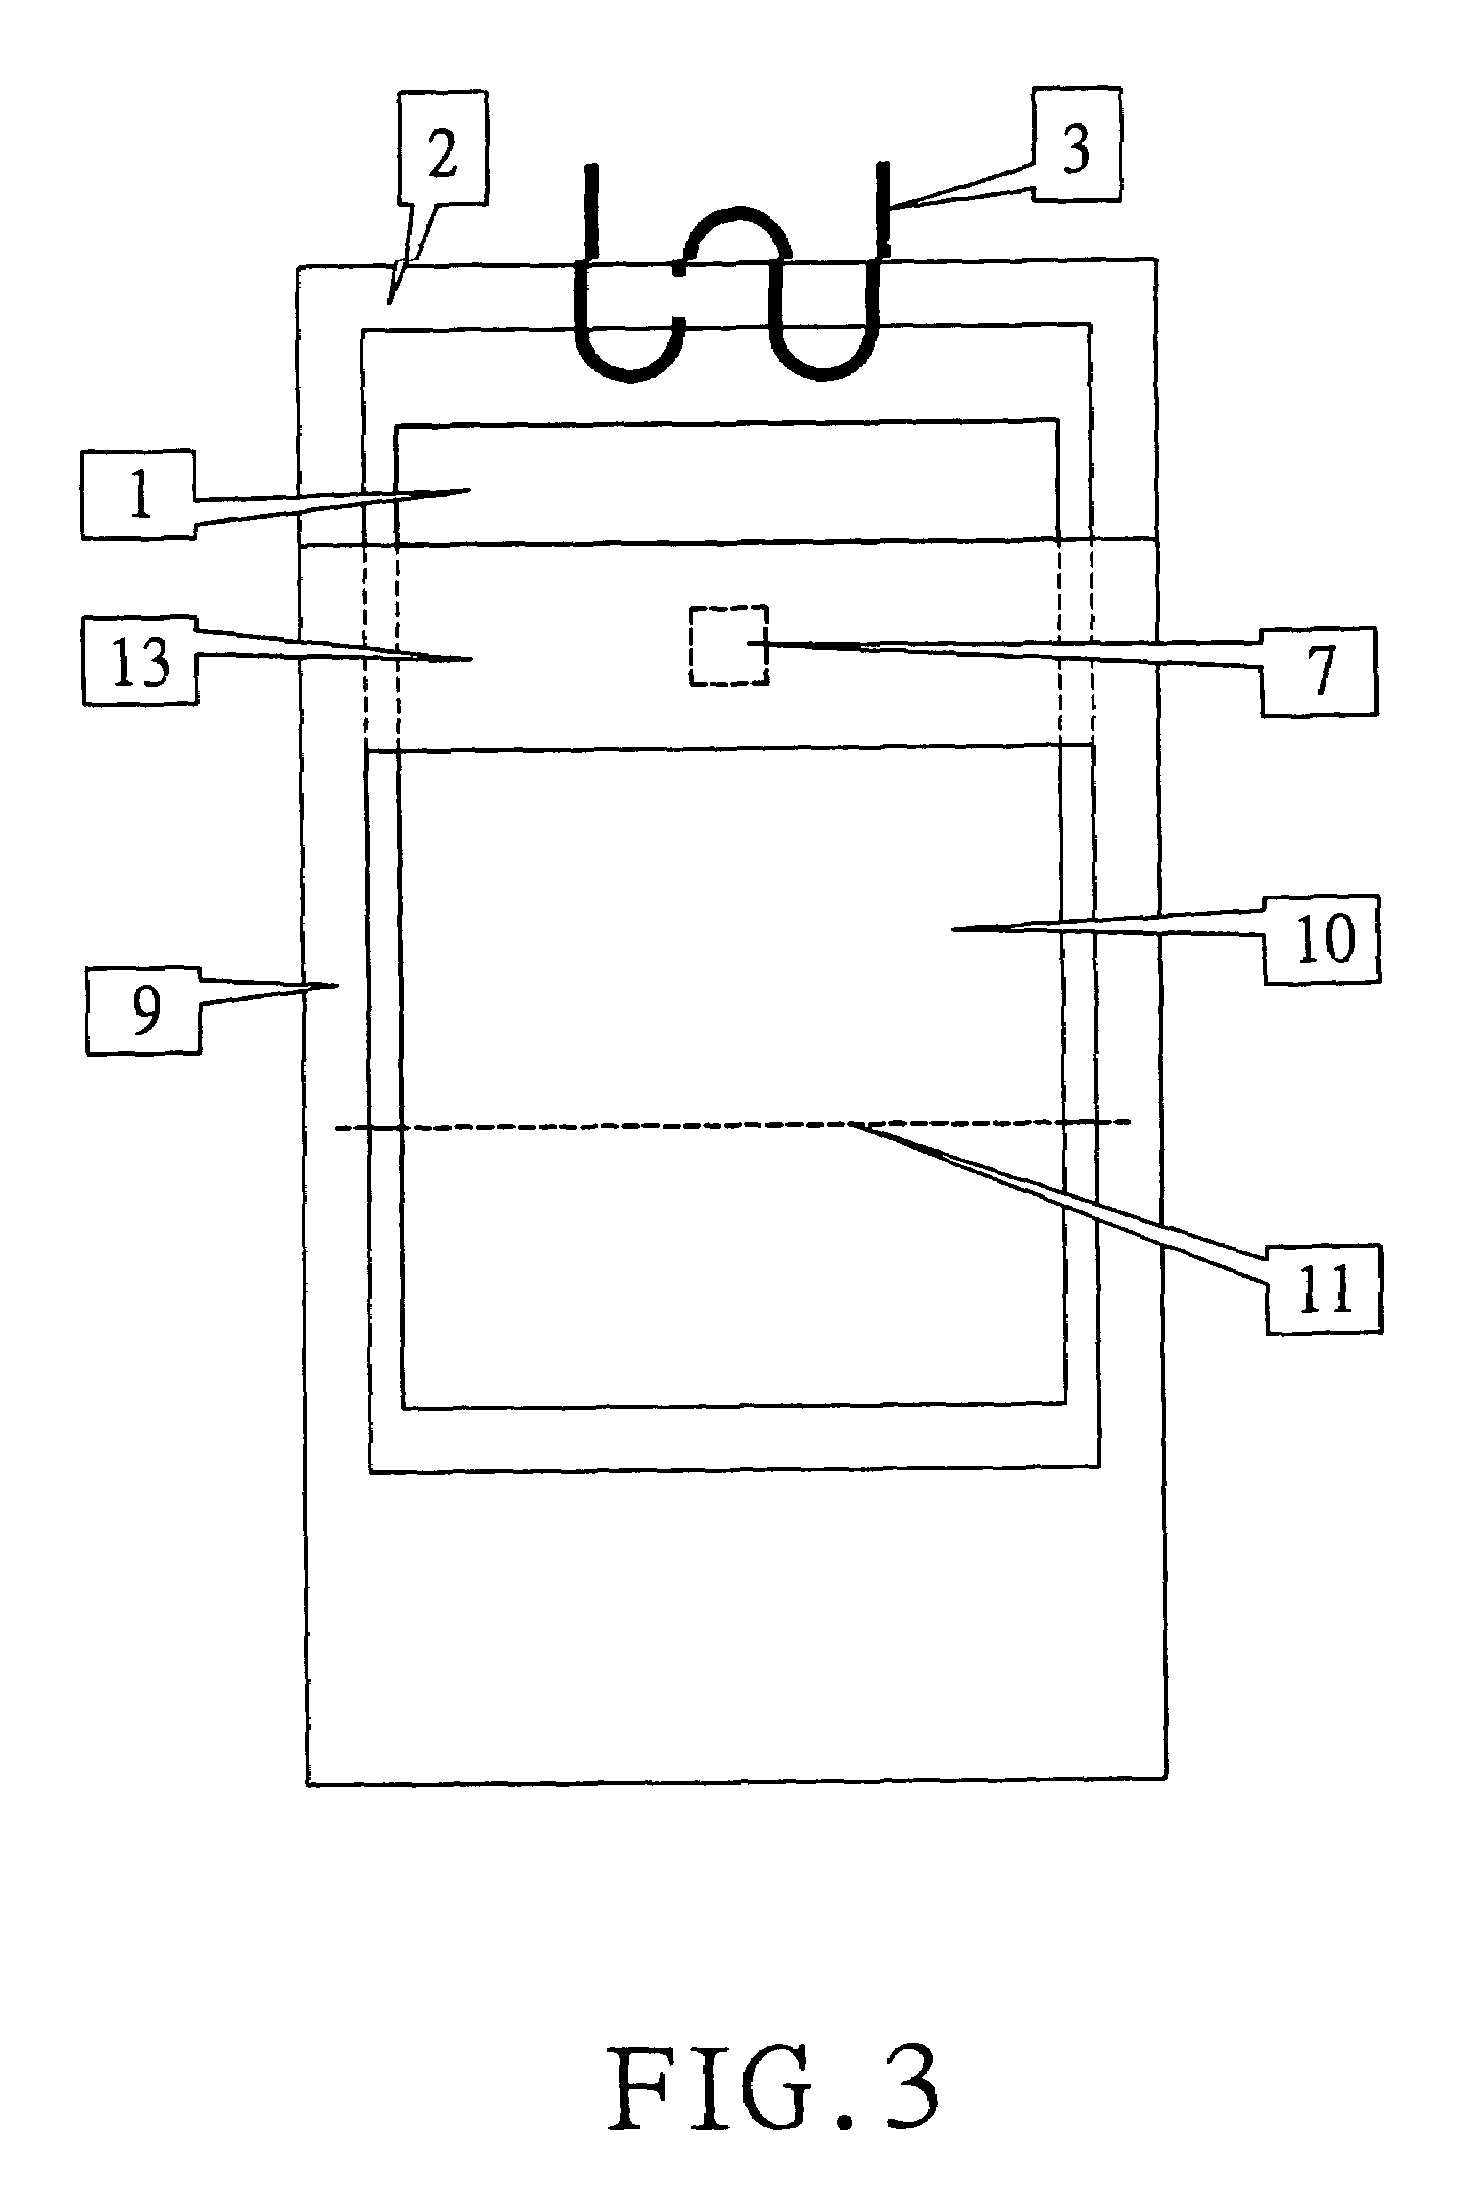 Apparatus for converting ocean wave energy into electric power